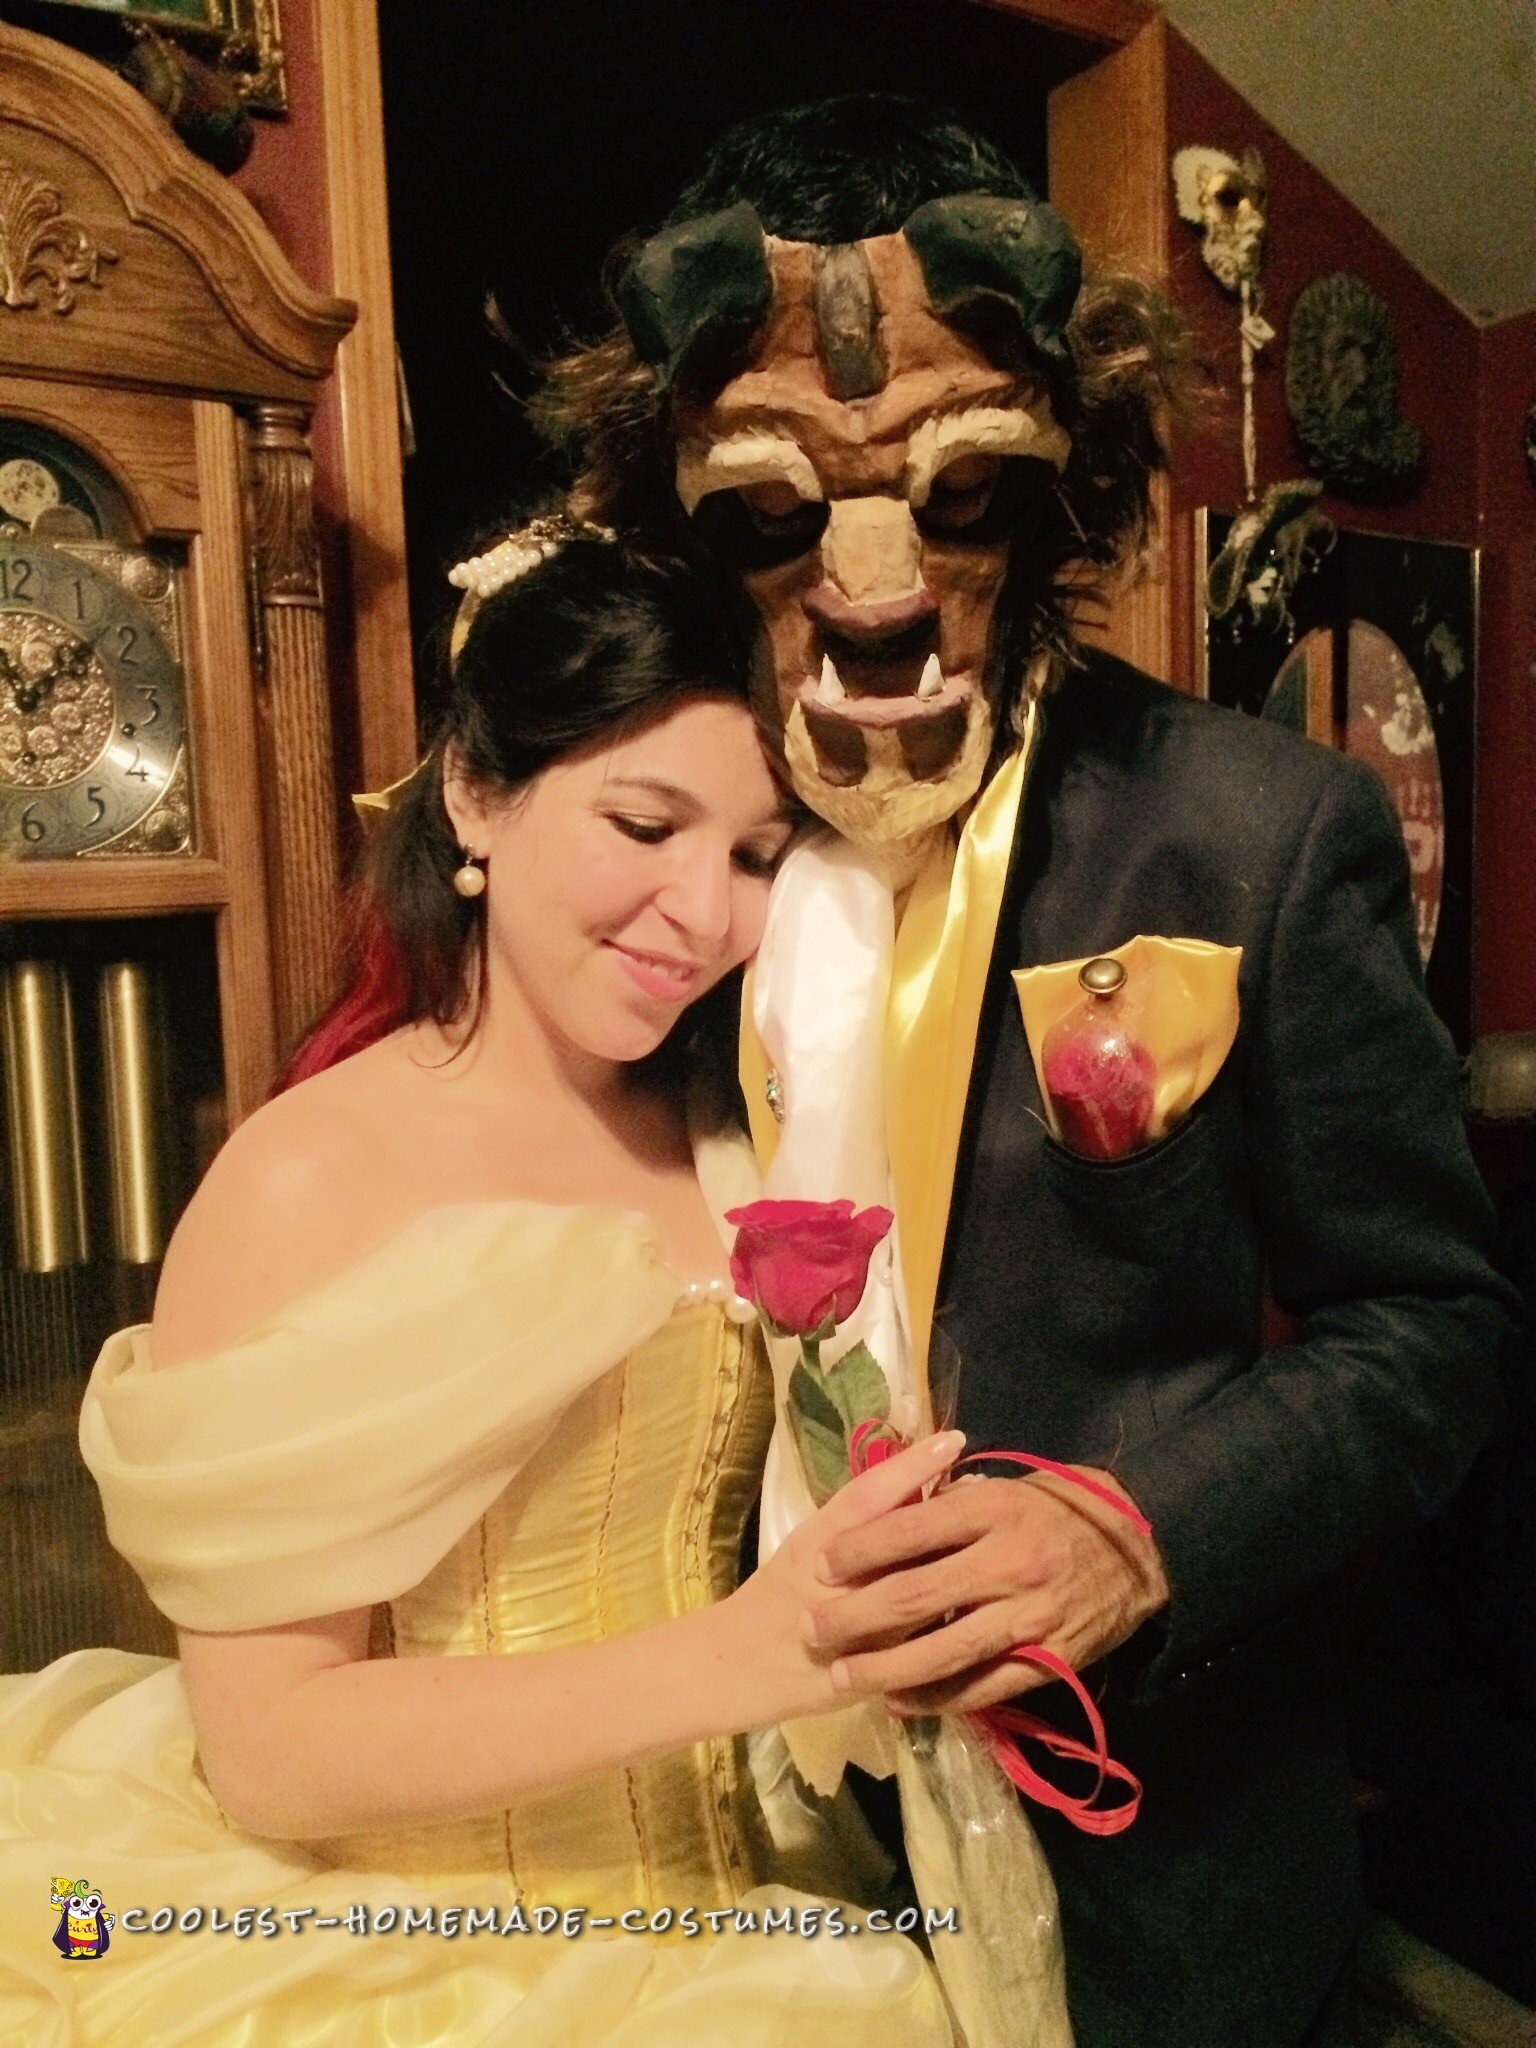 Tale as Old as Time - Beauty and the Beast Couple Costume